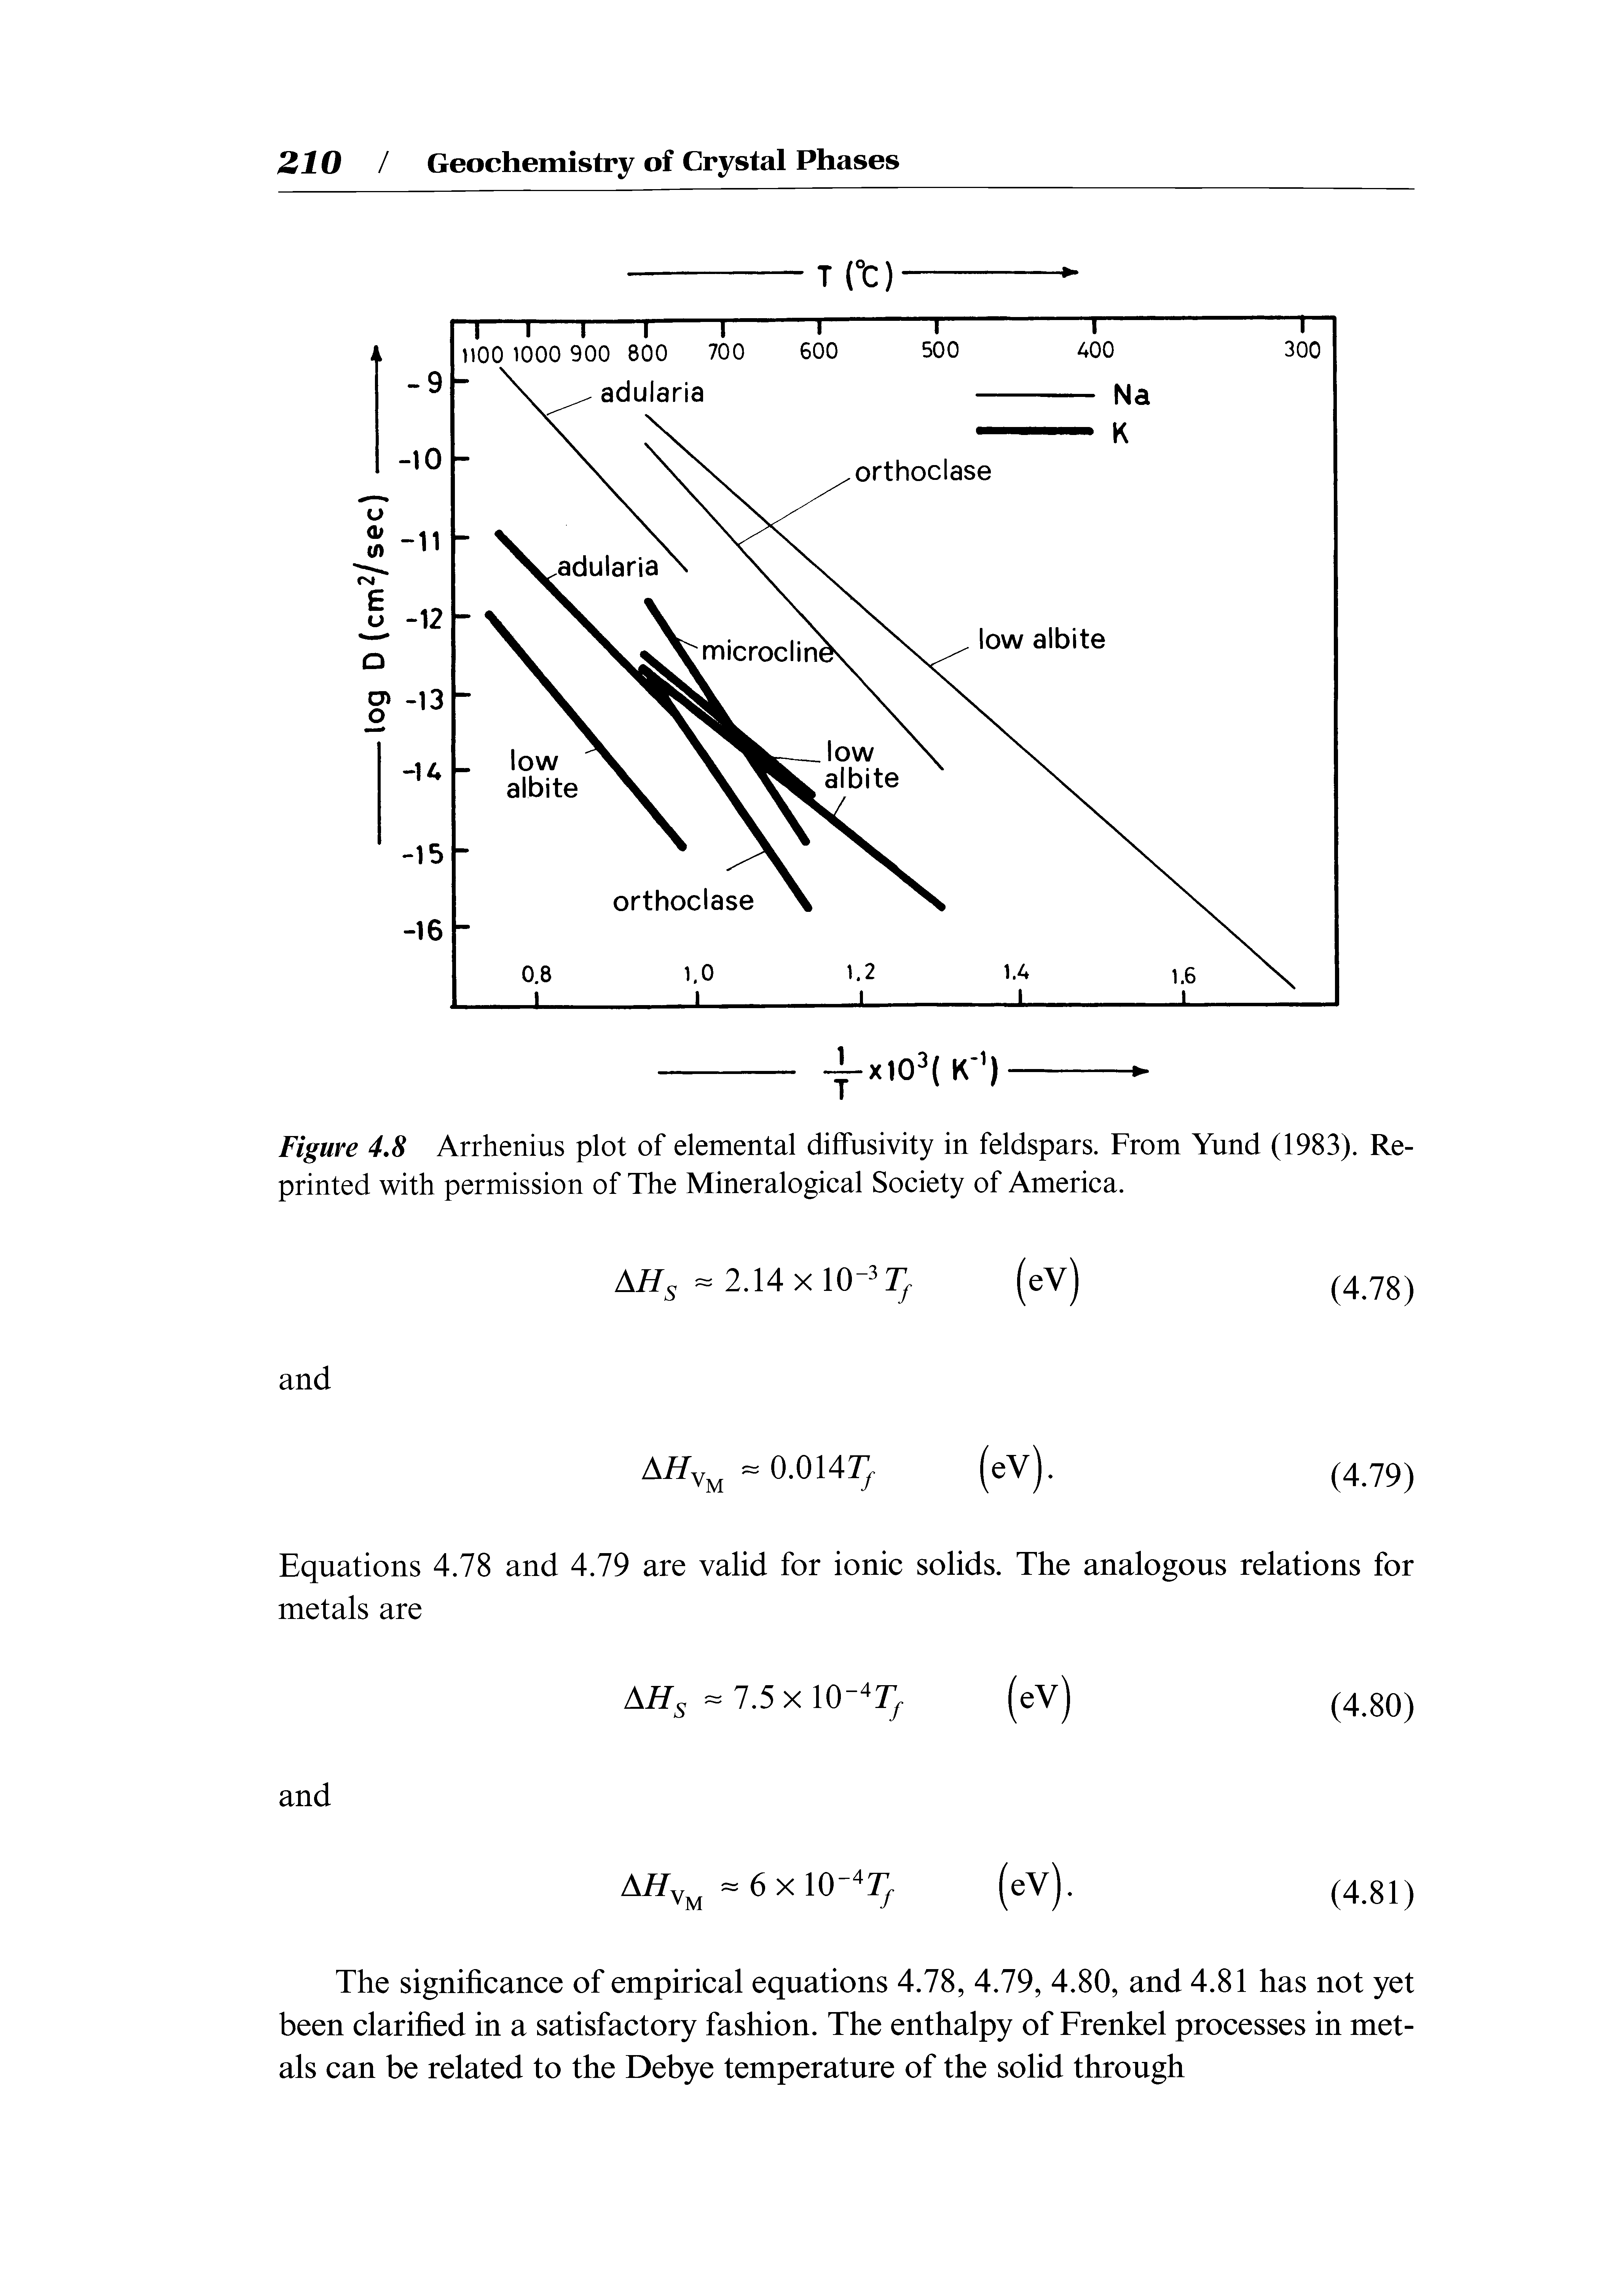 Figure 4.8 Arrhenius plot of elemental diffusivity in feldspars. From Yund (1983). Reprinted with permission of The Mineralogical Society of America.